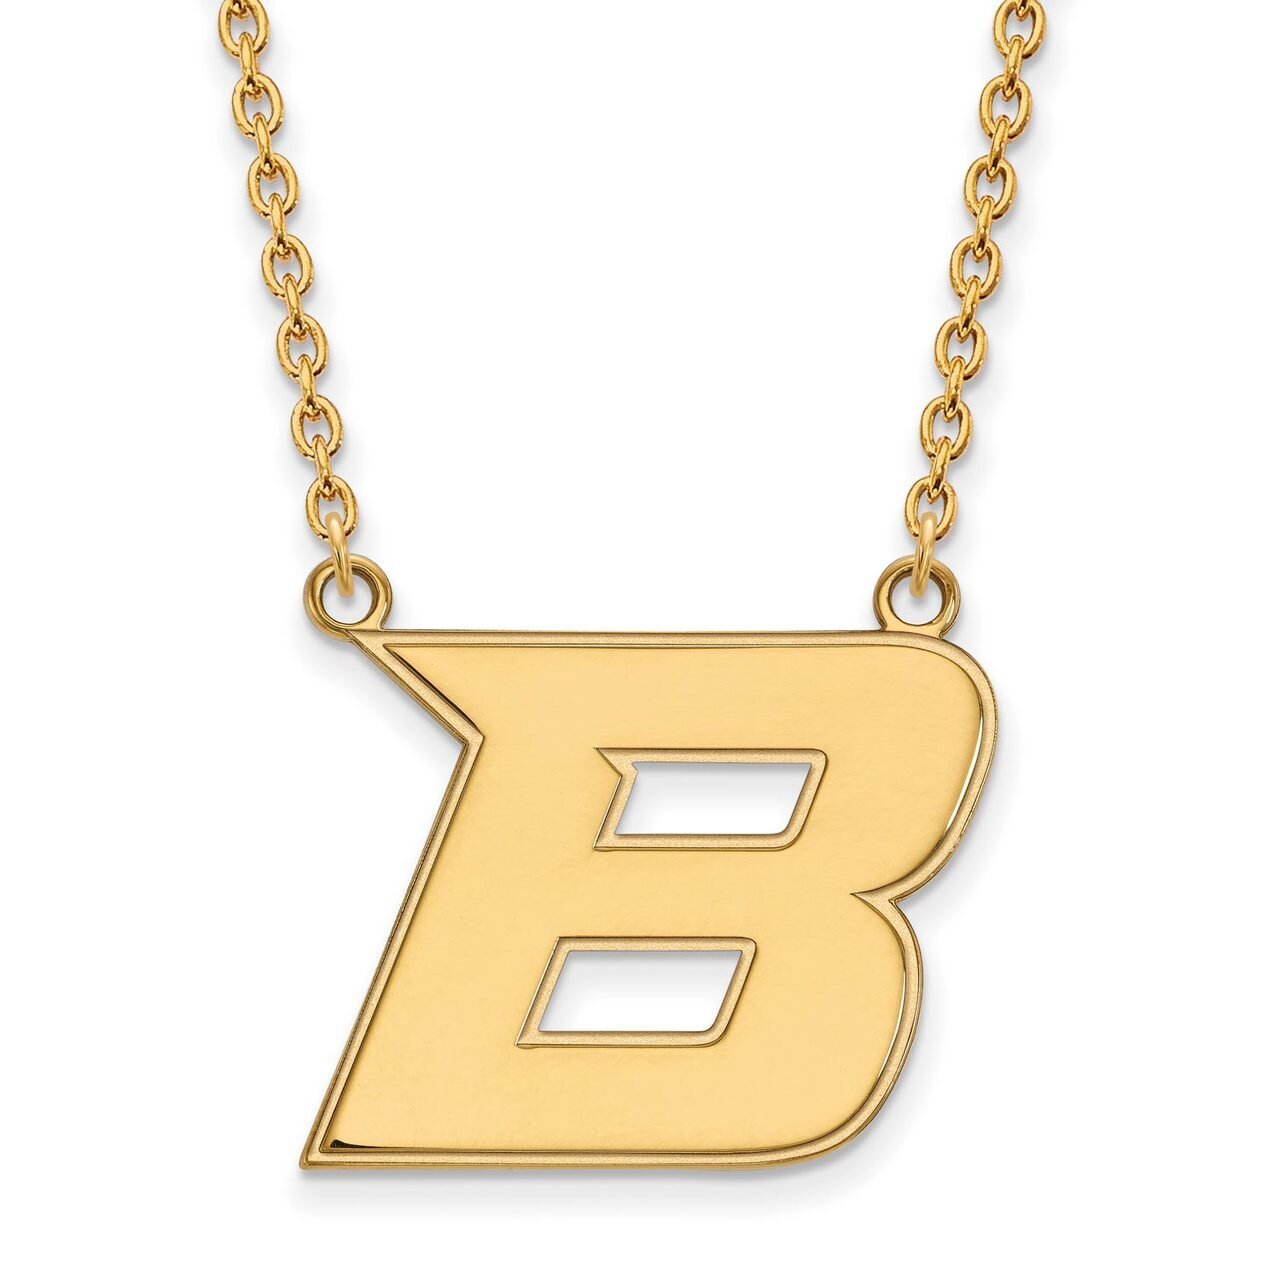 Boise State University Large Pendant with Chain Necklace 10k Yellow Gold 1Y008BOS-18